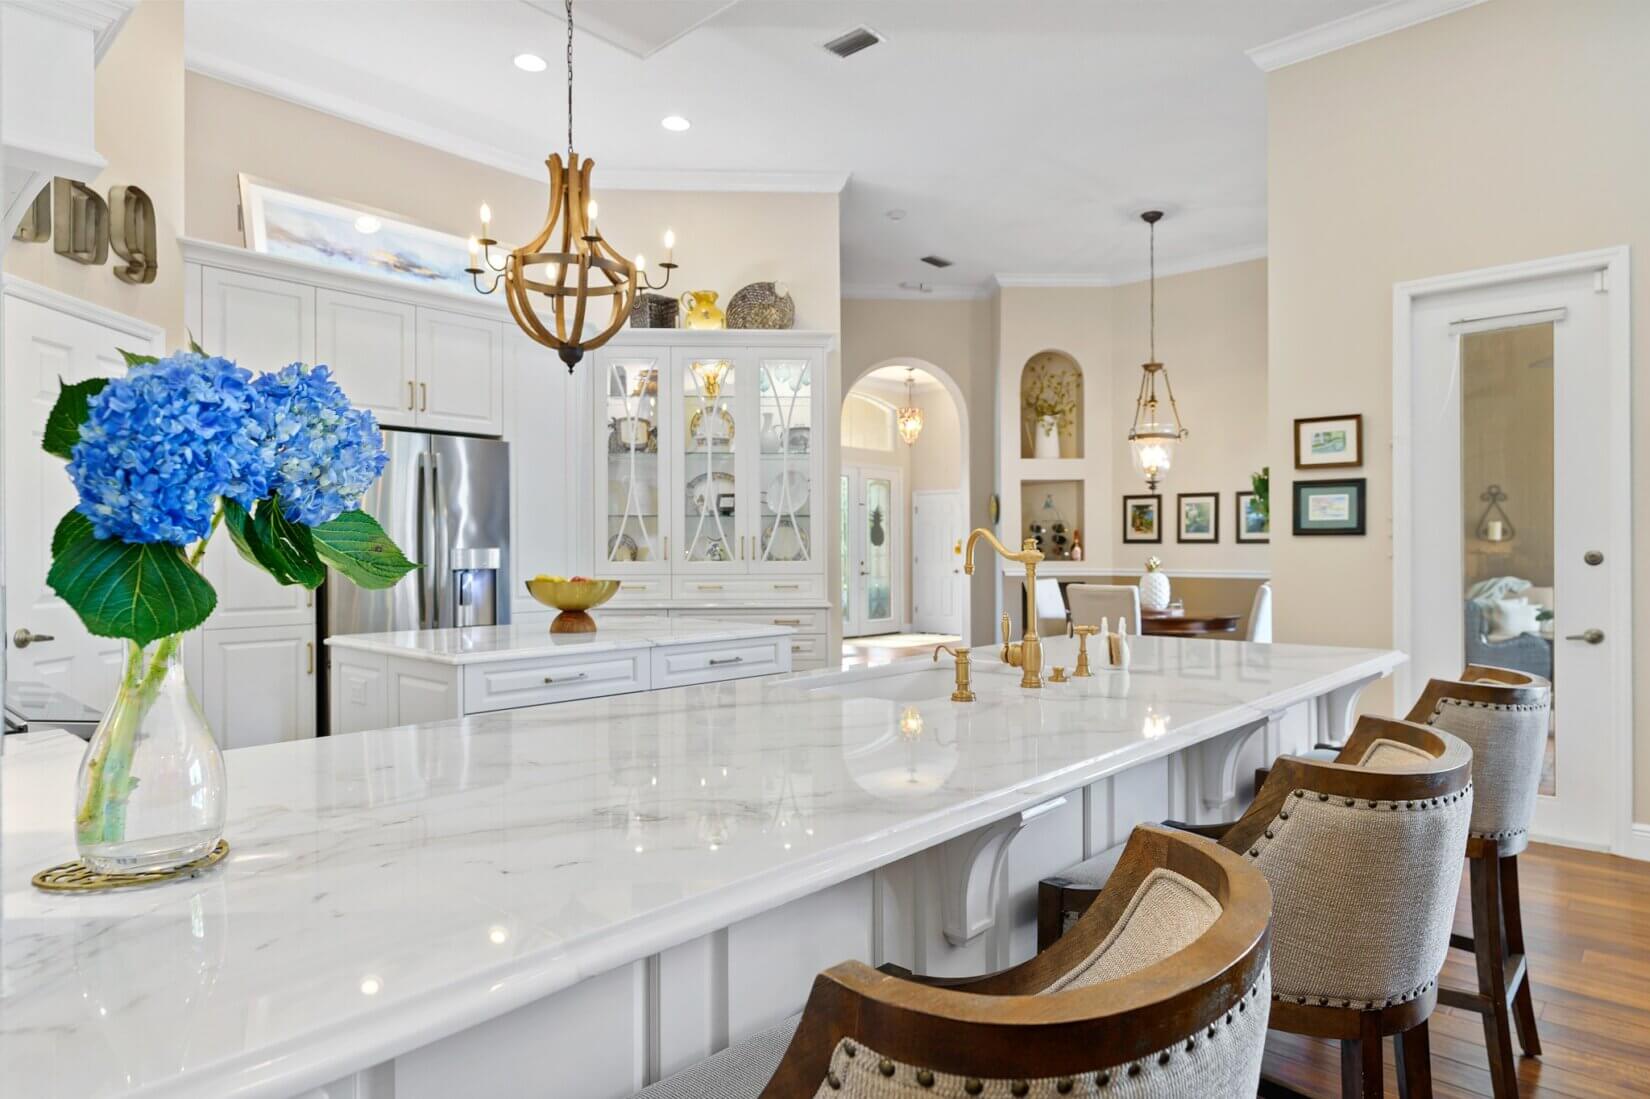 Large luxury kitchen with white cabinetry and white marble counters